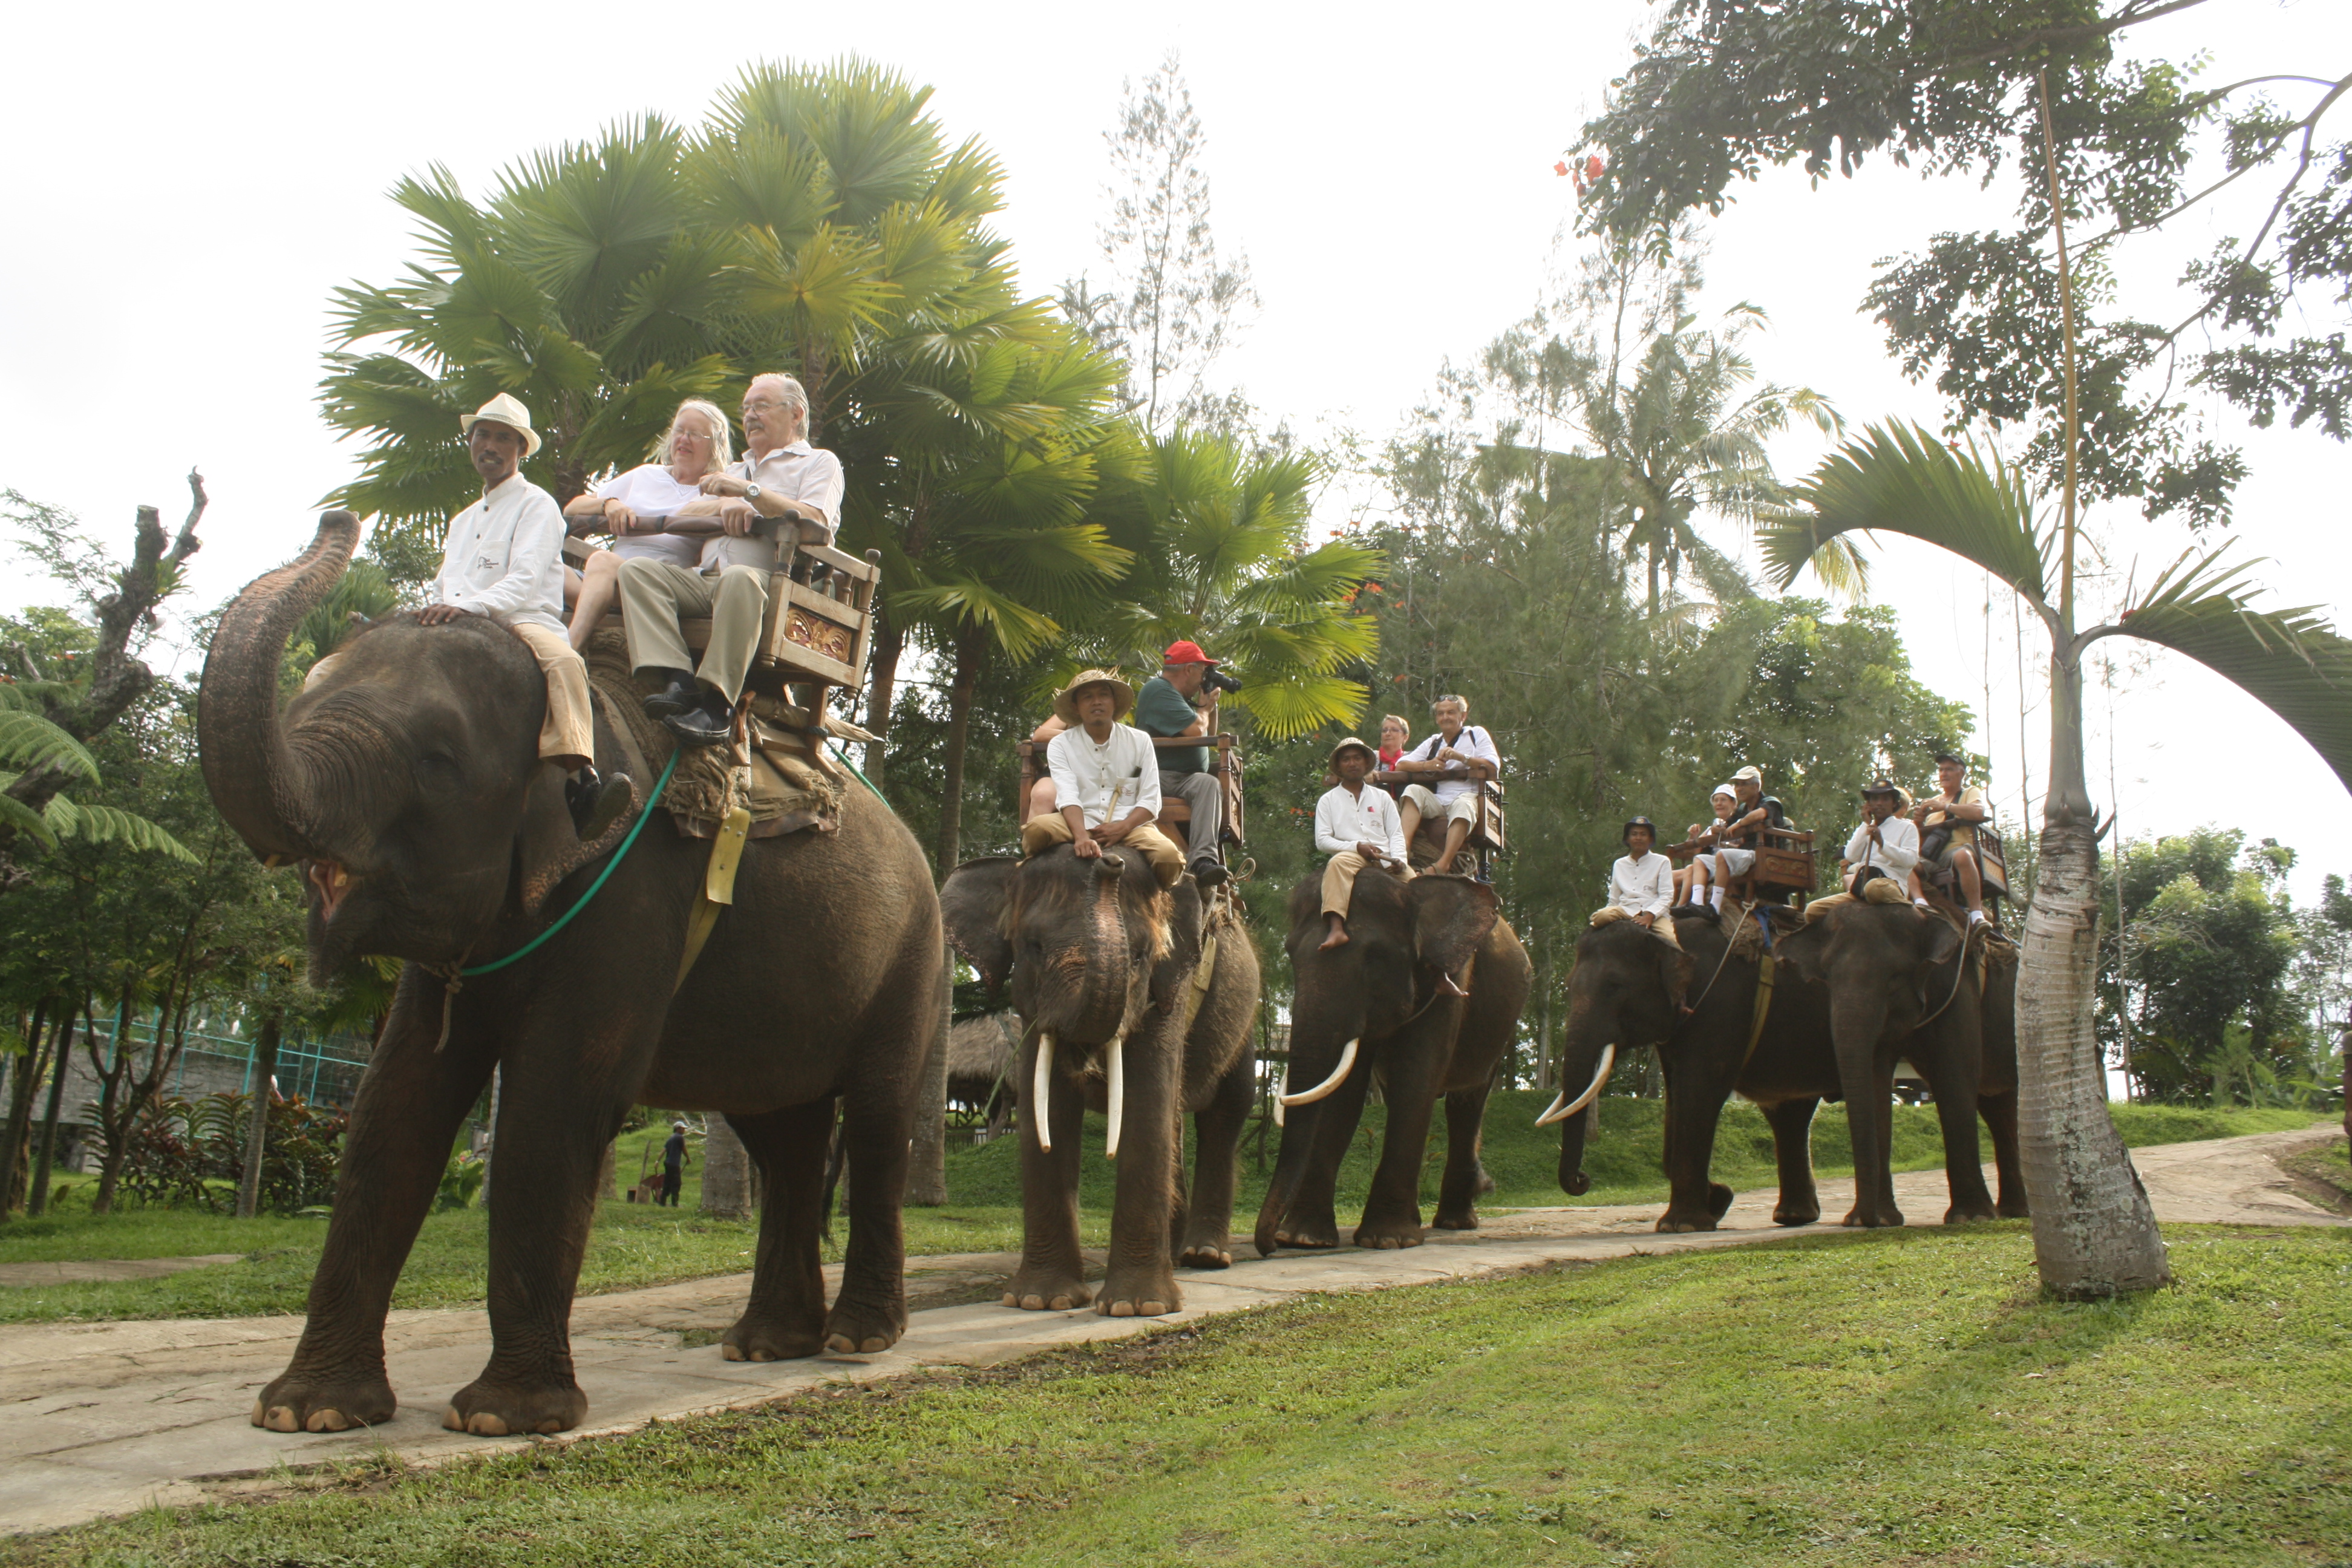 Bali Elephant Ride Ubud - 20% Off - There is 7 Packages